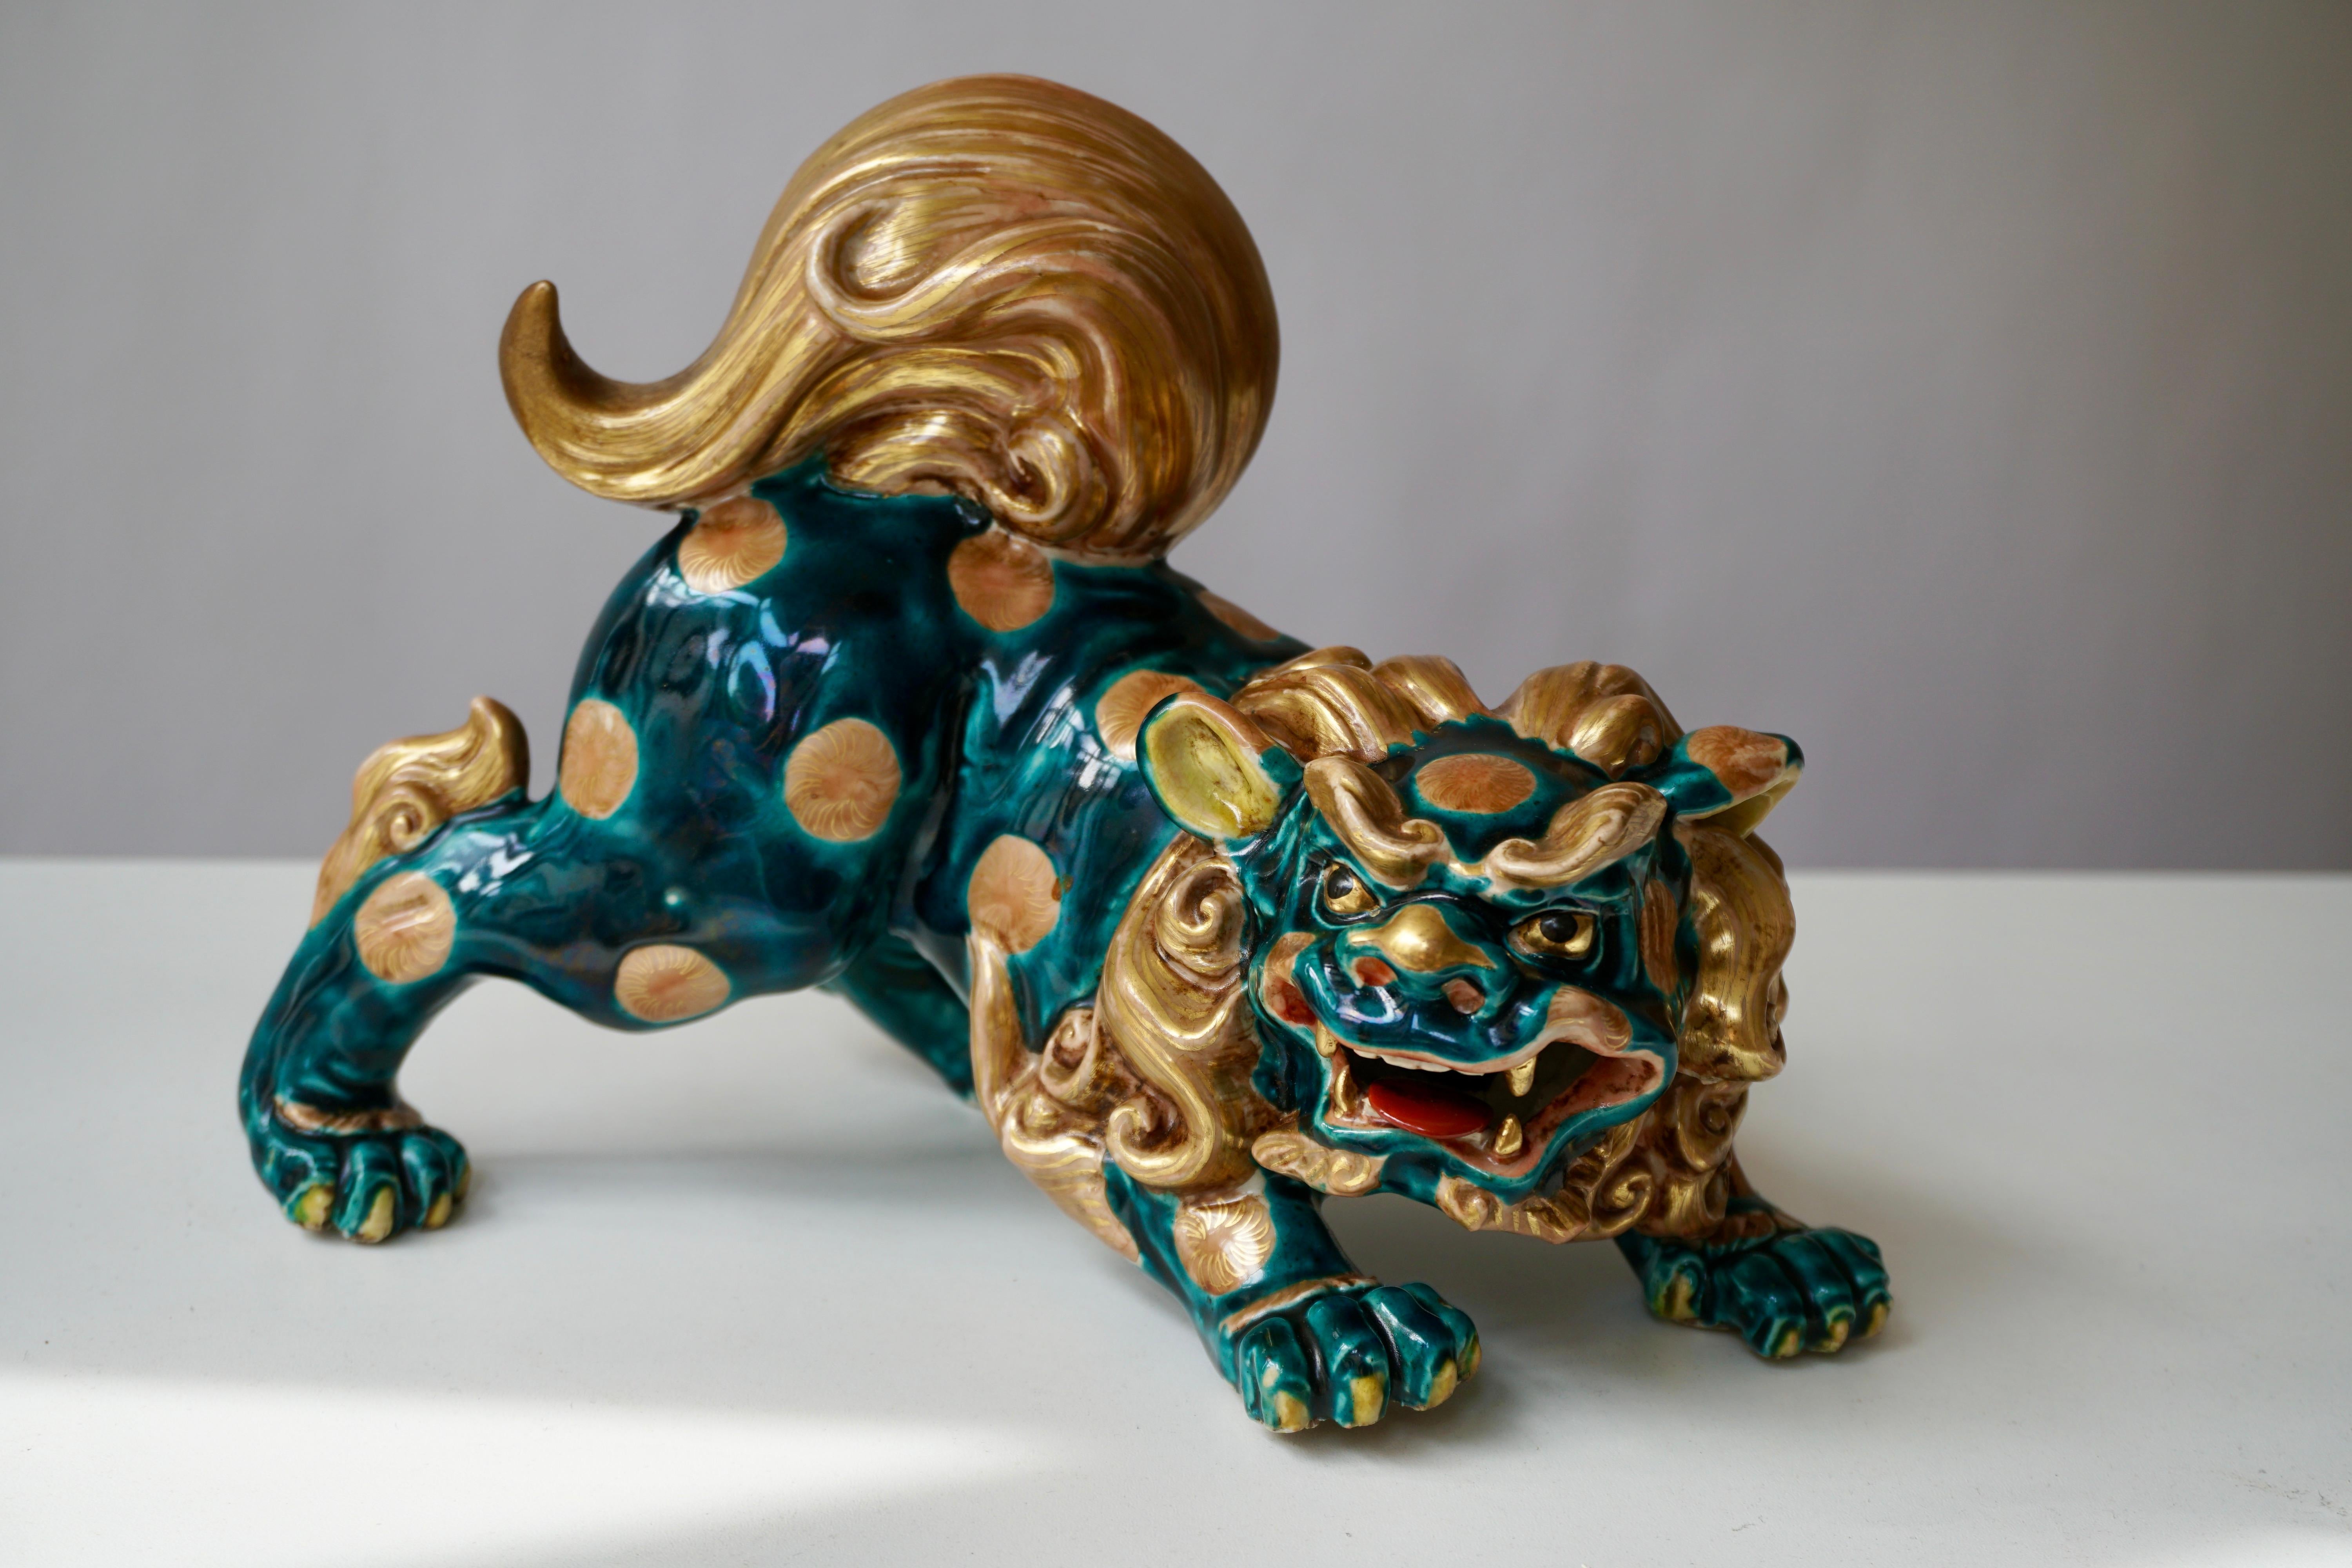 A painted Japanese porcelain sculpture representing the Foo dog. Features include incredible detail and expression with beautiful green and gold color.
Fu dog, foo dog or lion dog, or Chinese temple lion. Foo (Fu) means prosperity and good fortune